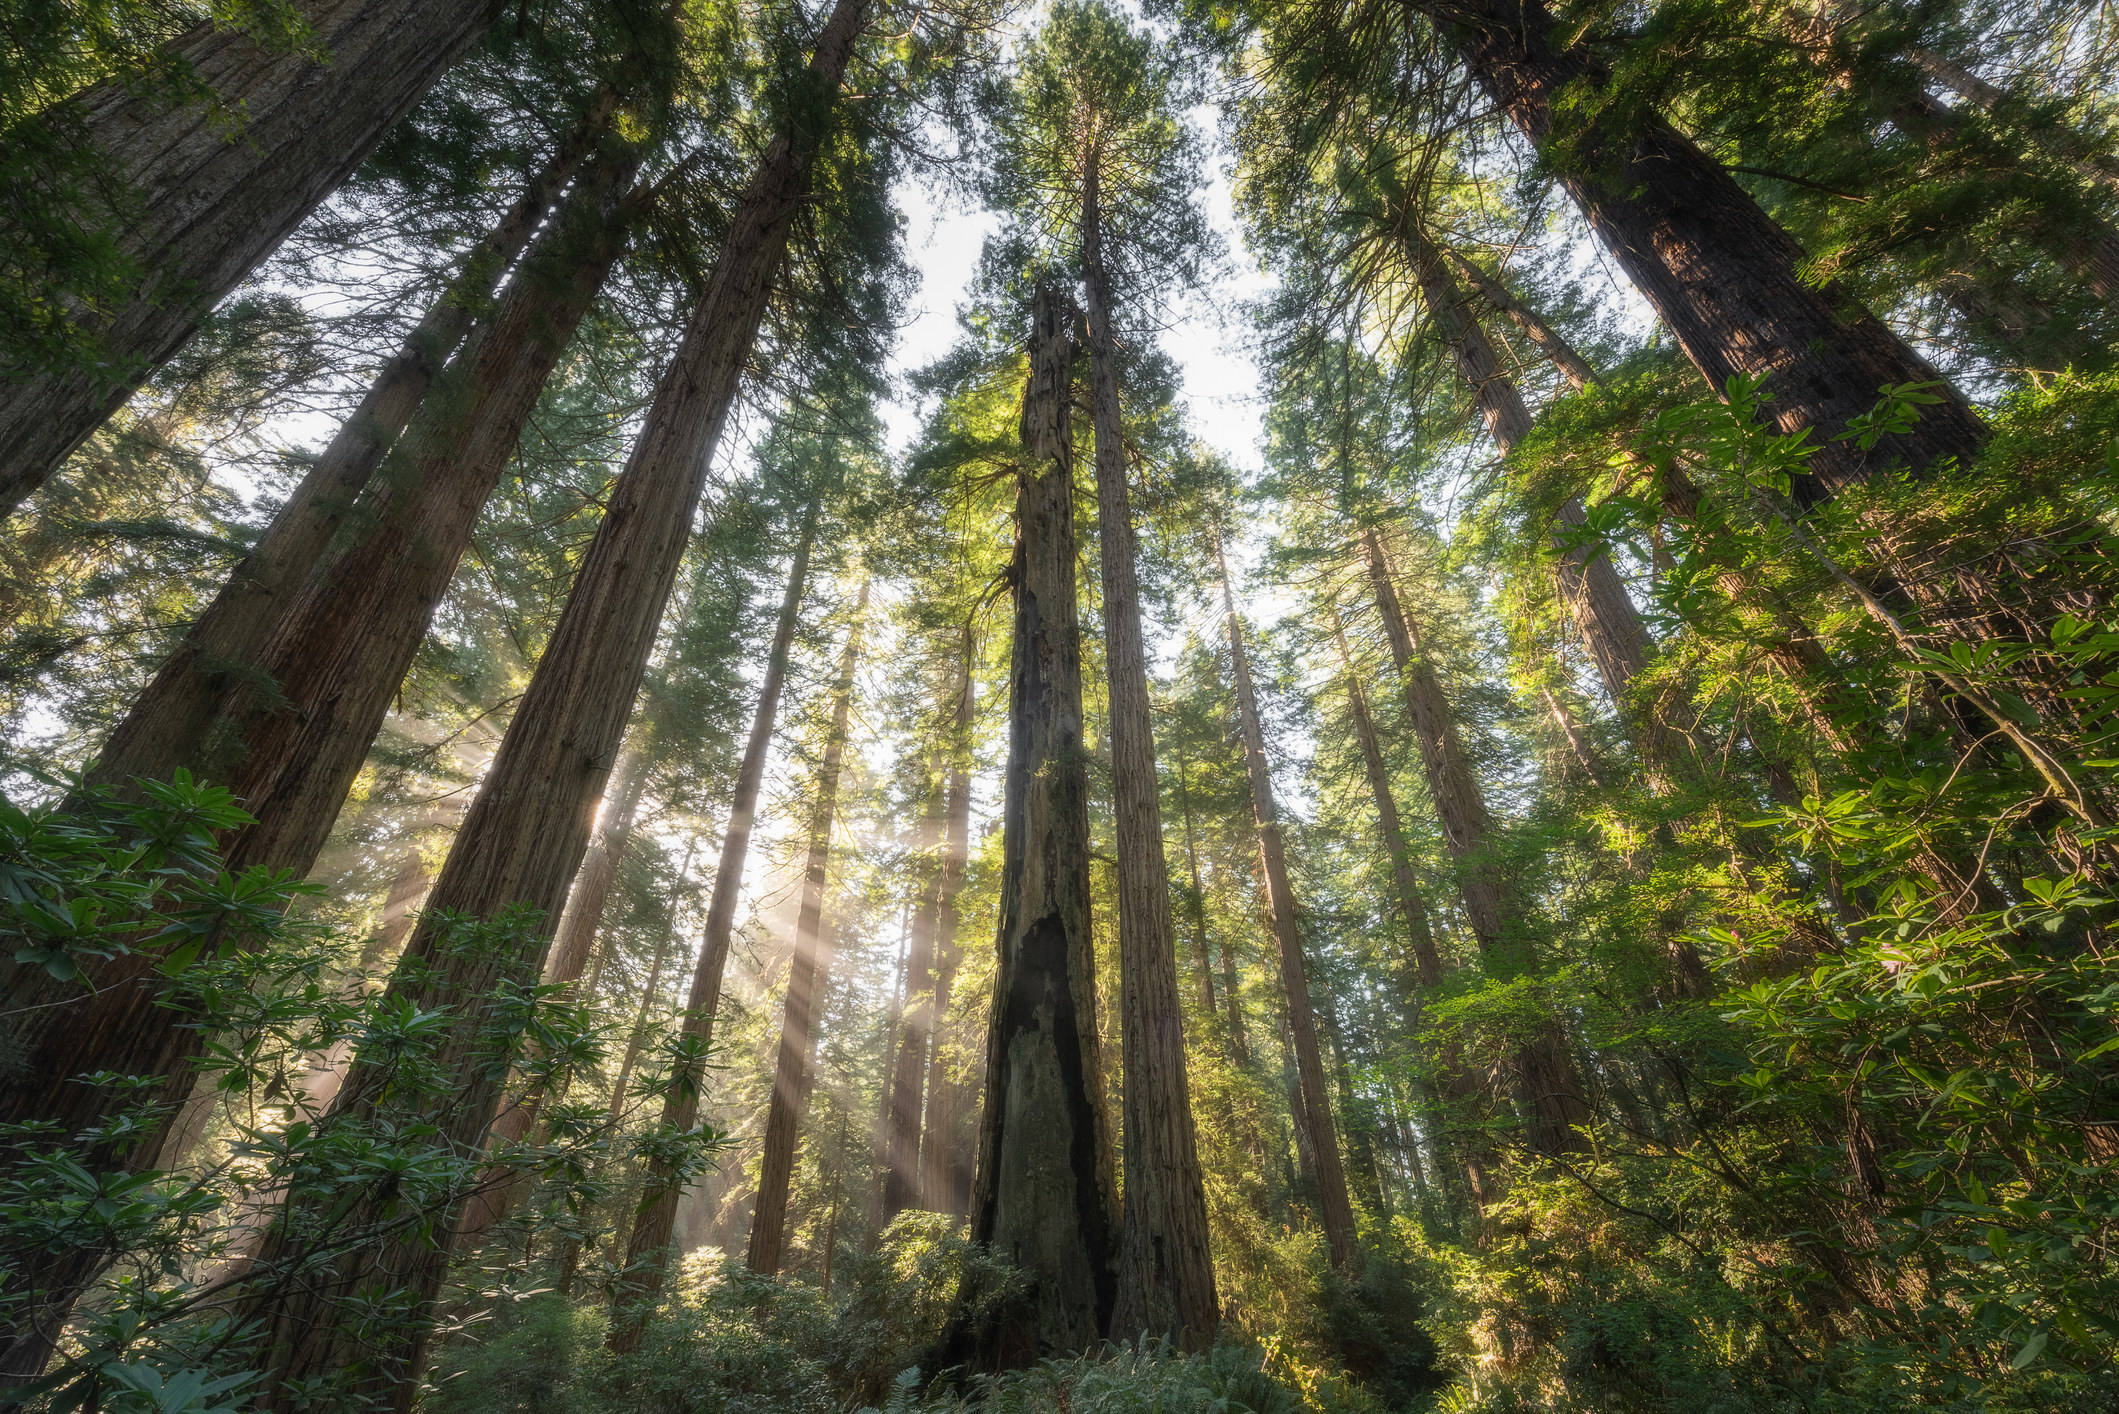 Light shines through the big tall trees in the Redwood Forest.